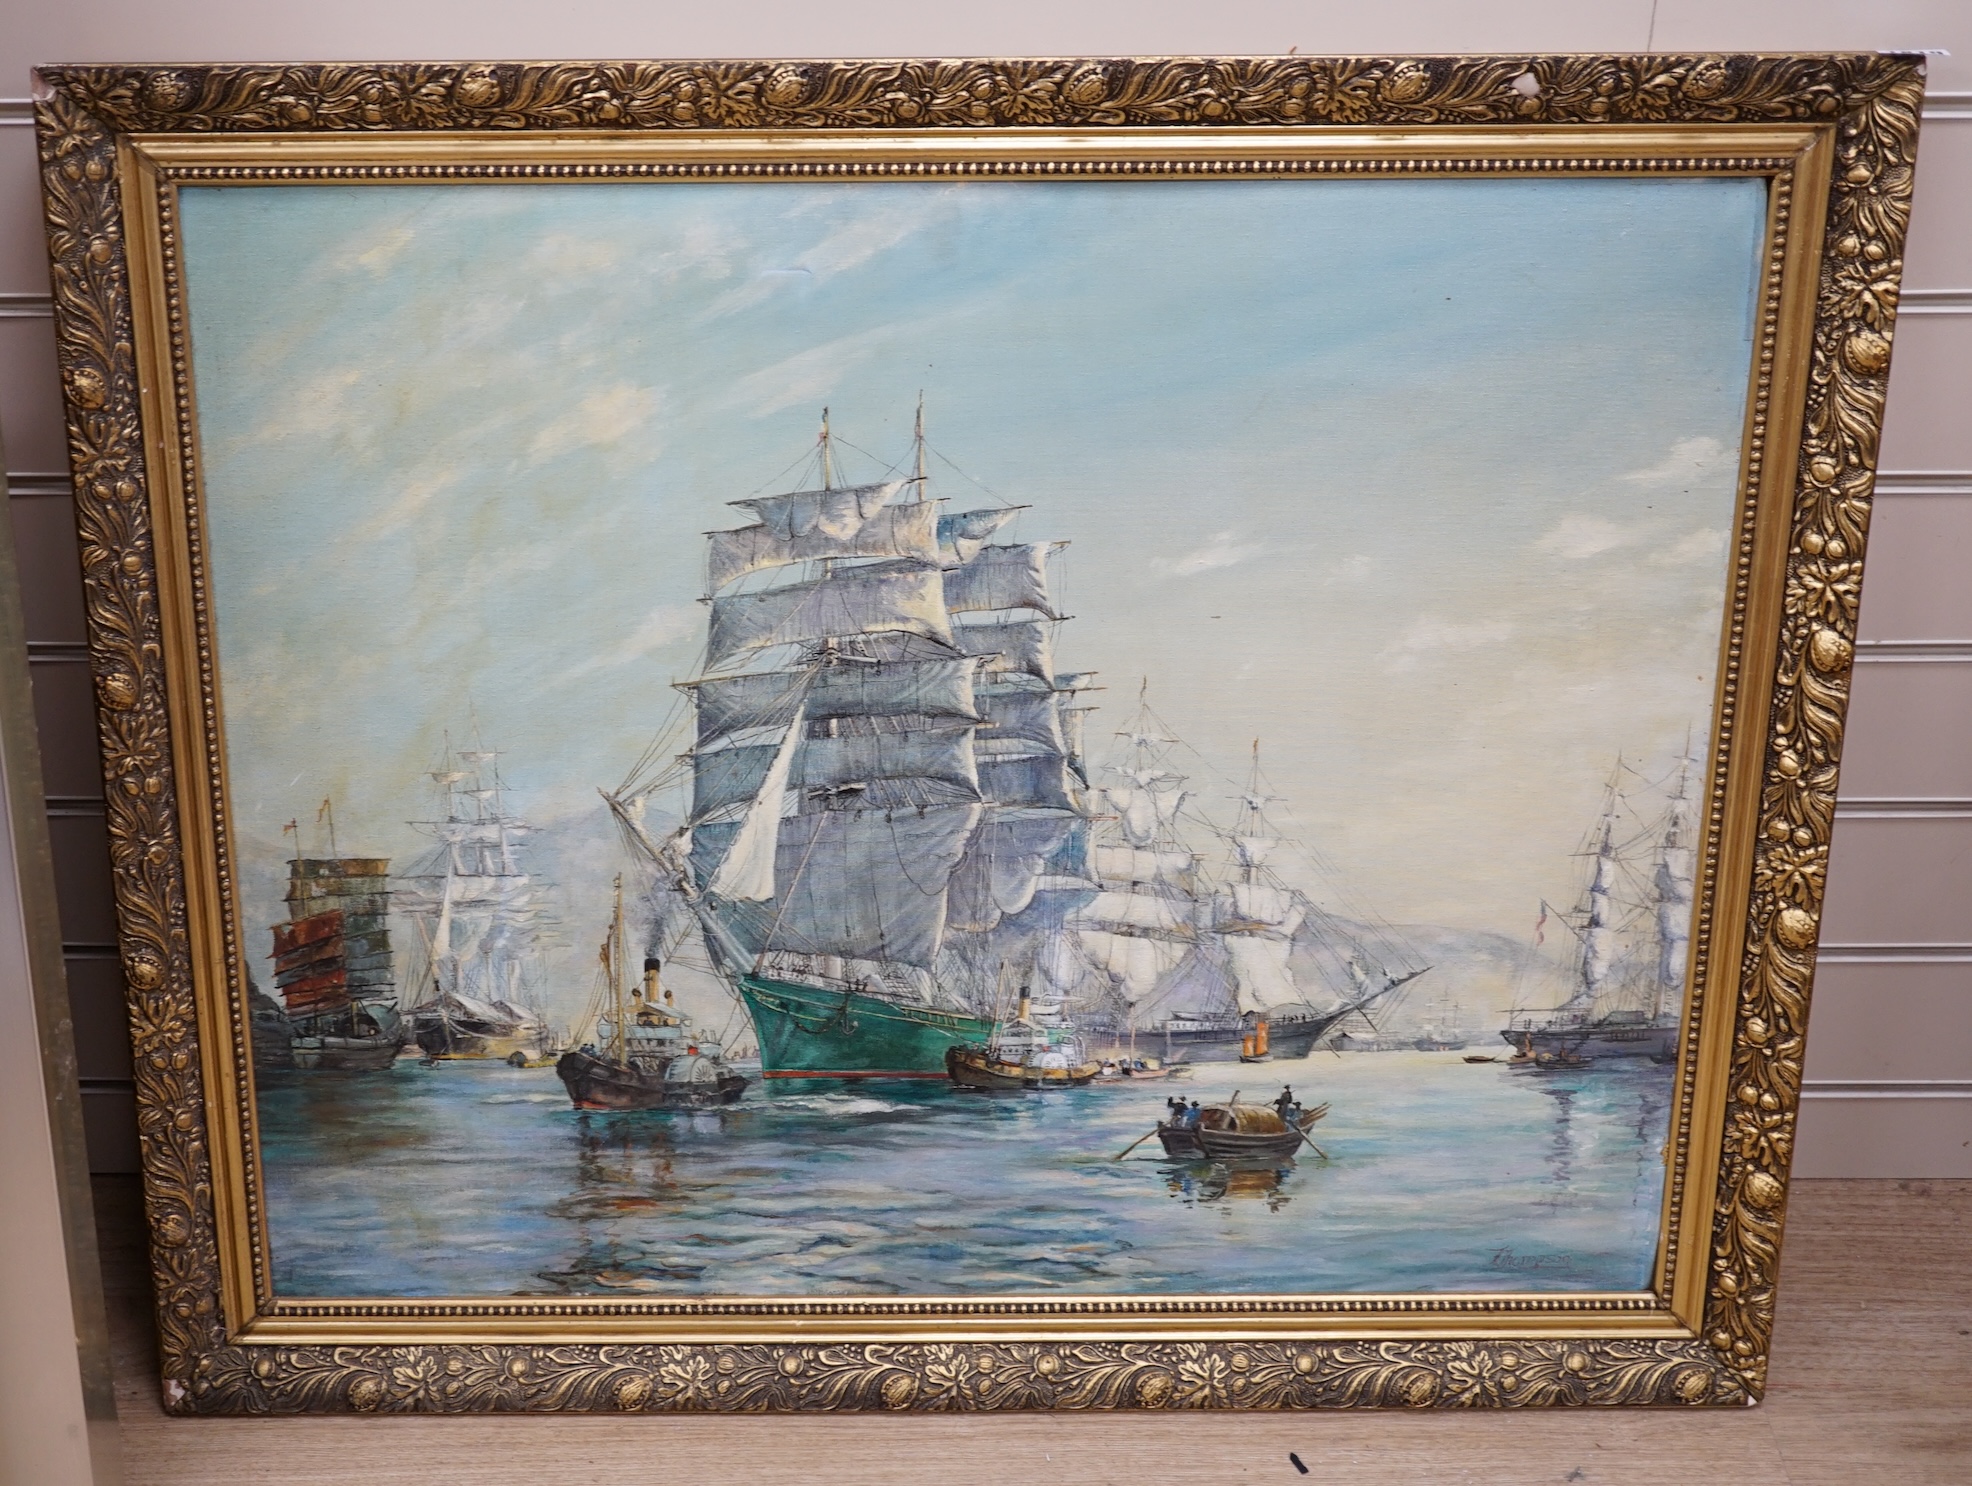 Thompson after Montague Dawson (1890-1973), maritime oil on canvas board, Kowloon, signed, 60 x 75cm, gilt framed. Condition